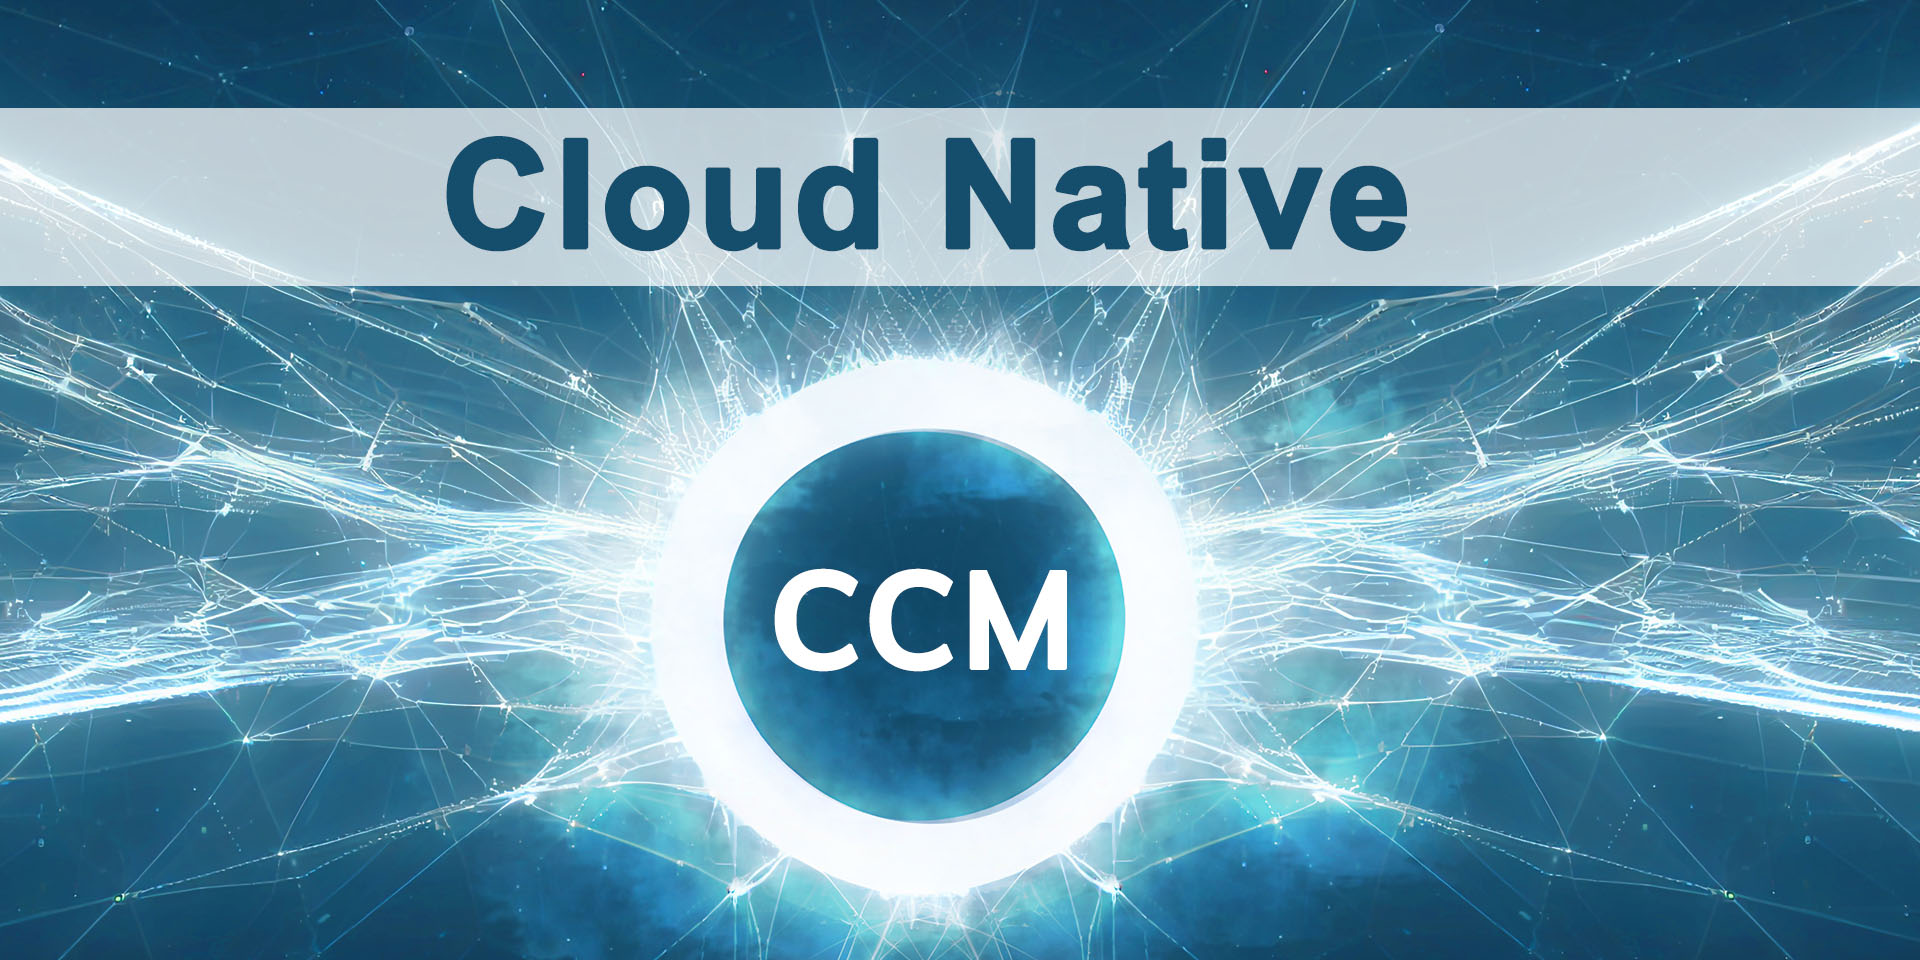 There is an unstoppable trend to migrate even business critical applications to the cloud or to create cloud native solutions, including Cloud native CCM.